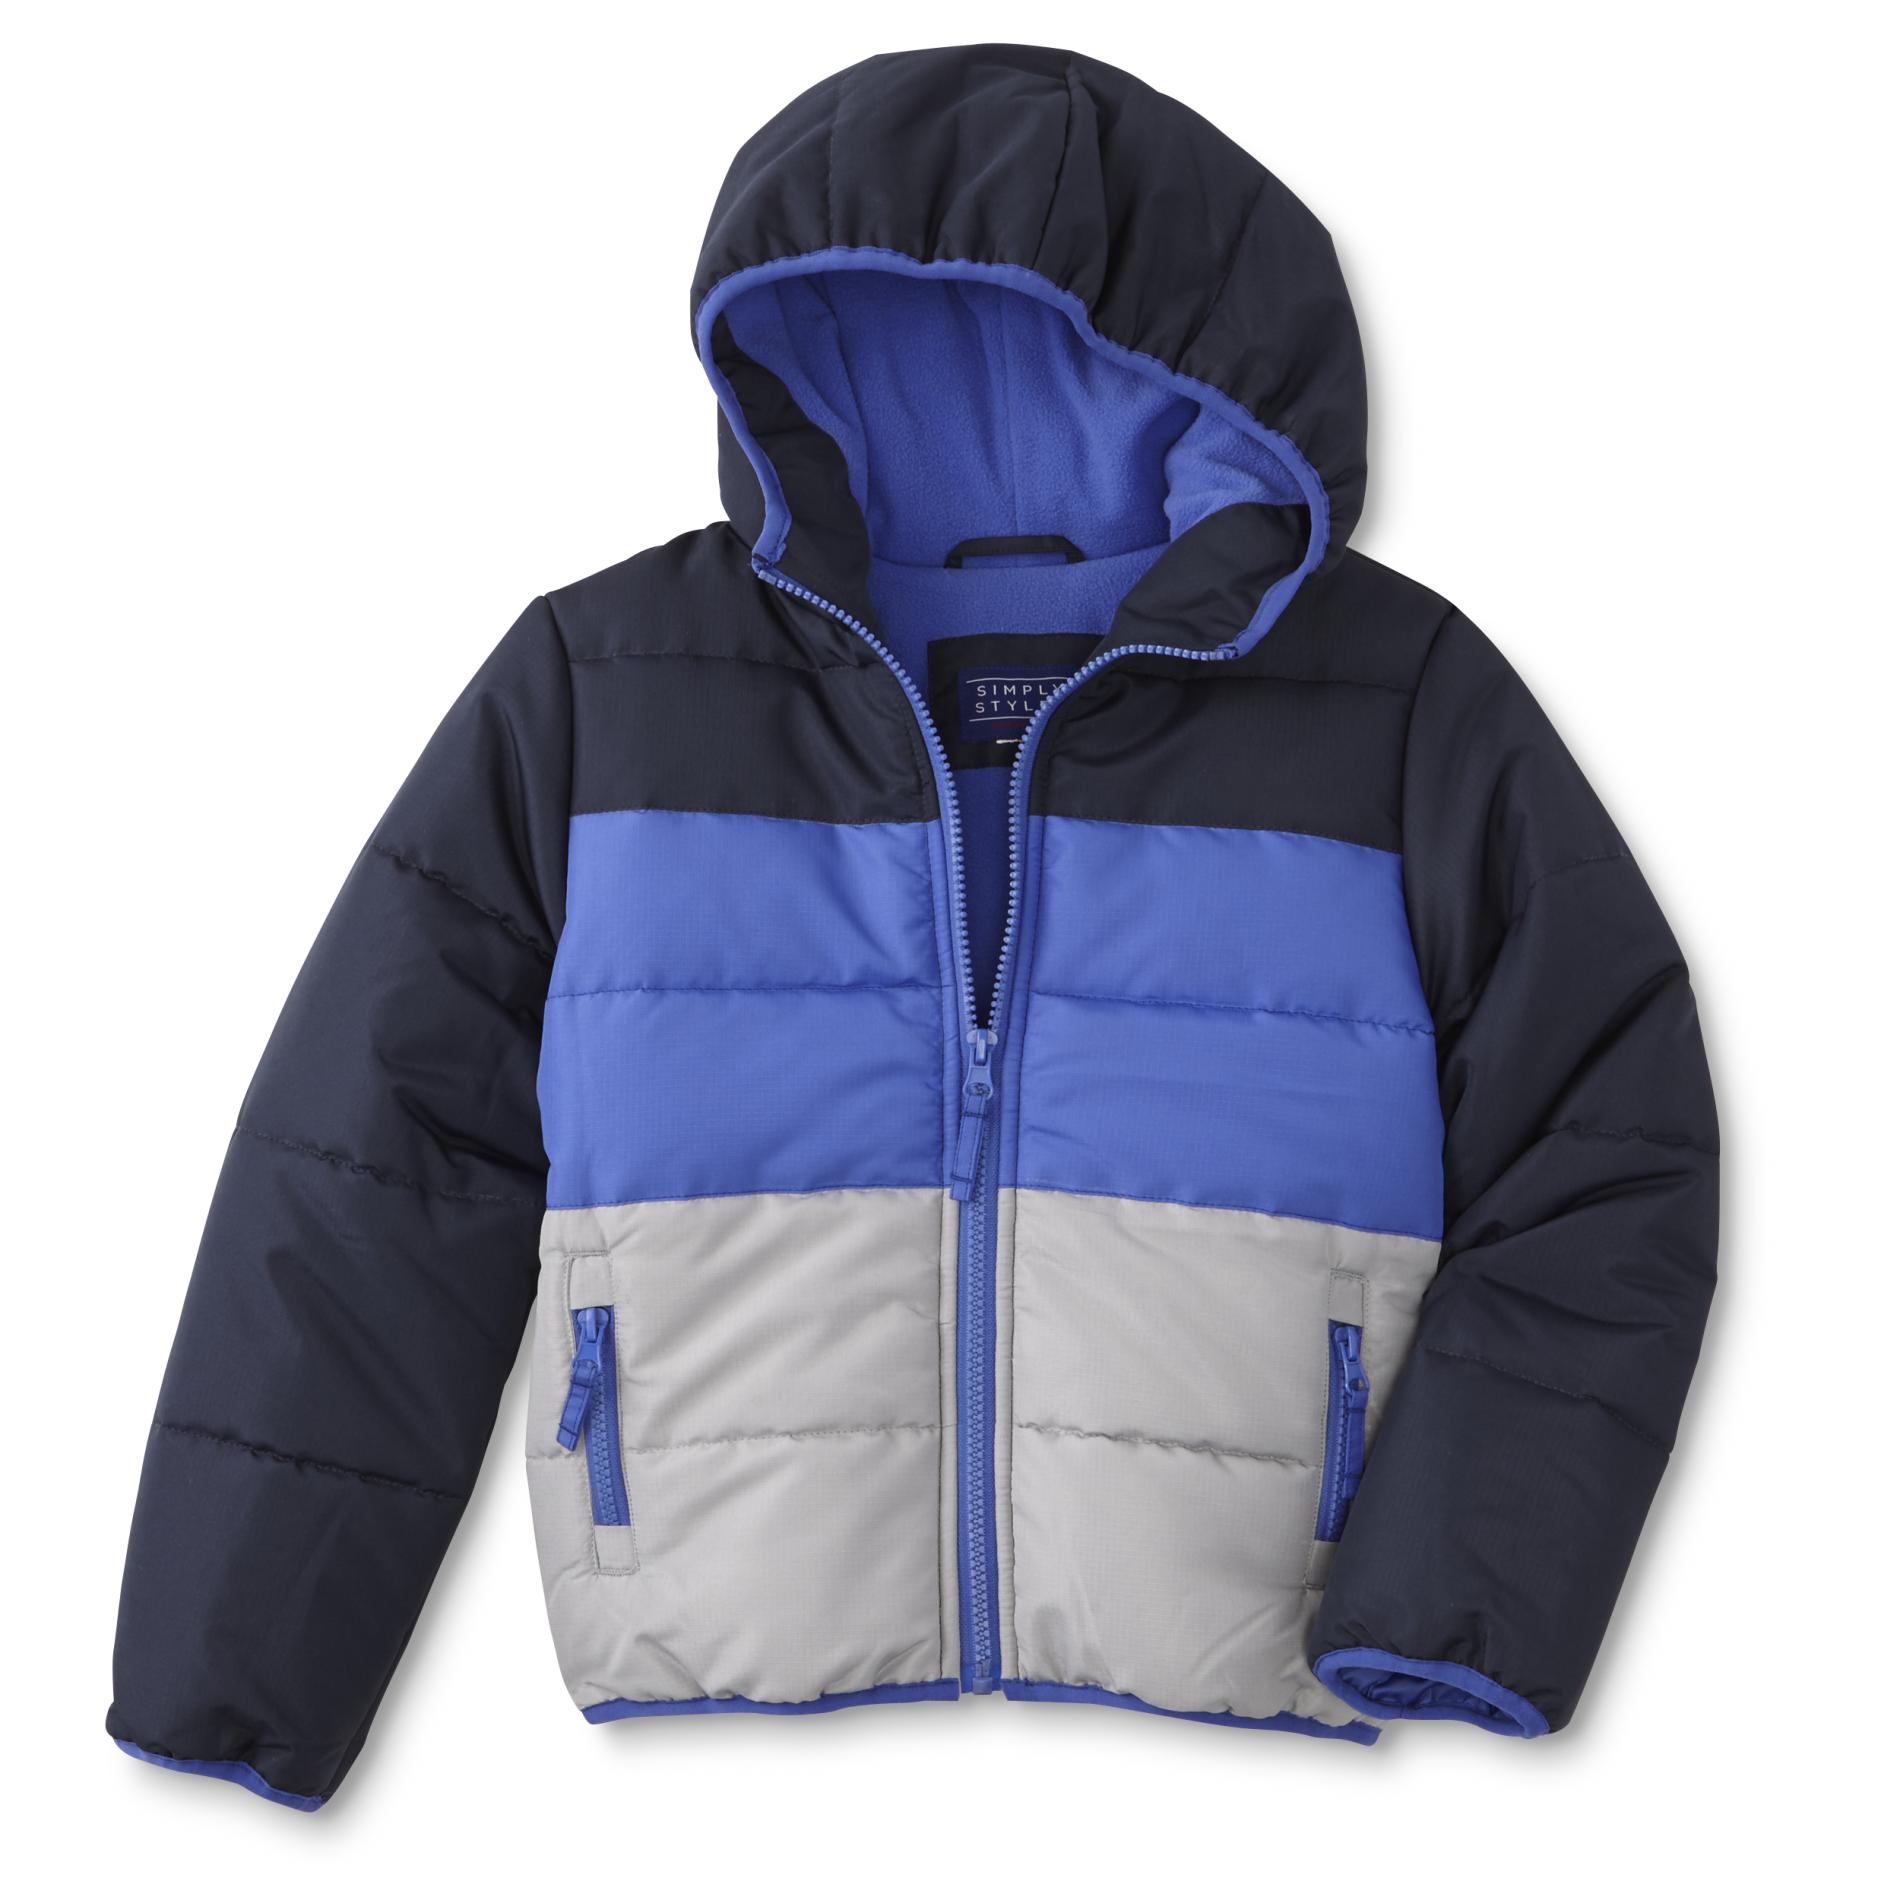 Simply Styled Boy's Puffer Coat - Colorblock